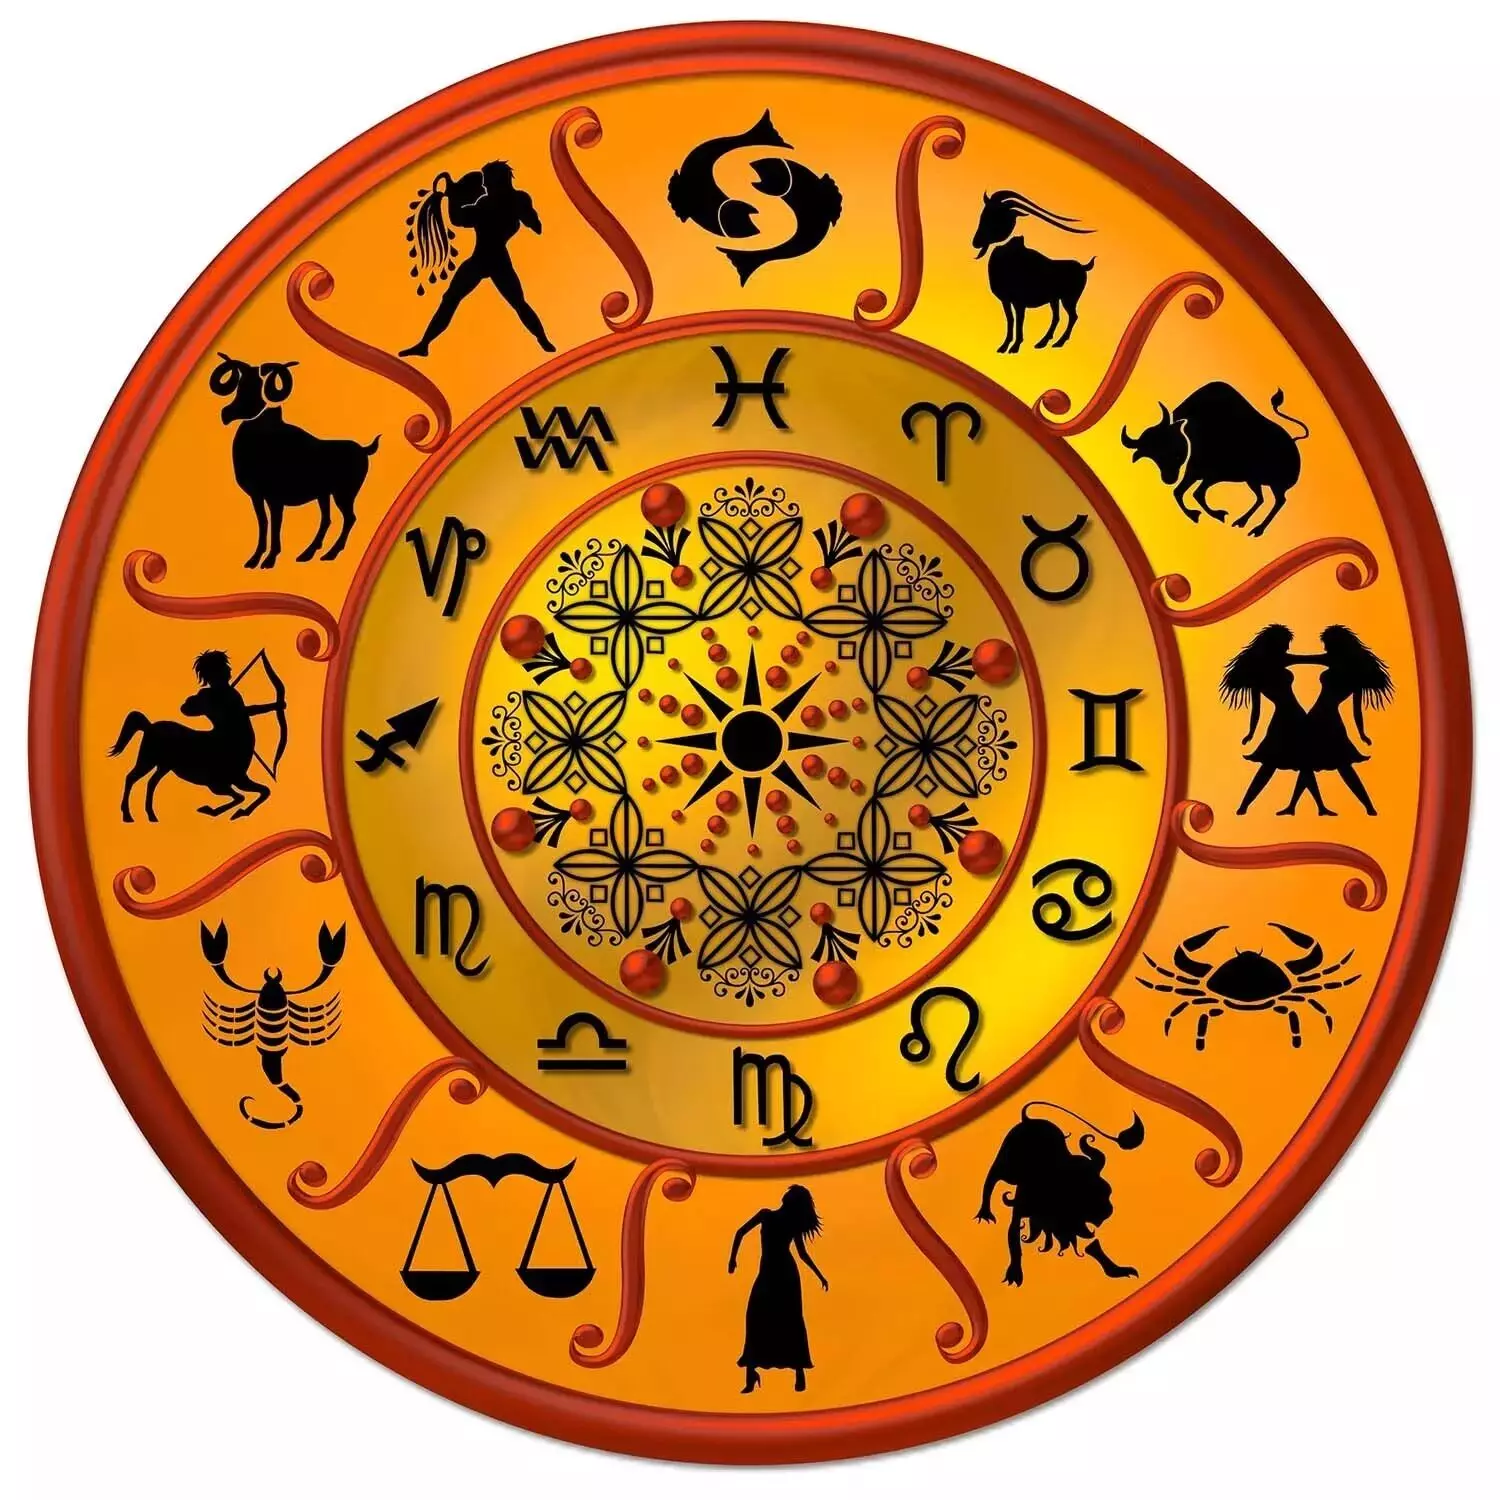 28 September  – Know your todays horoscope